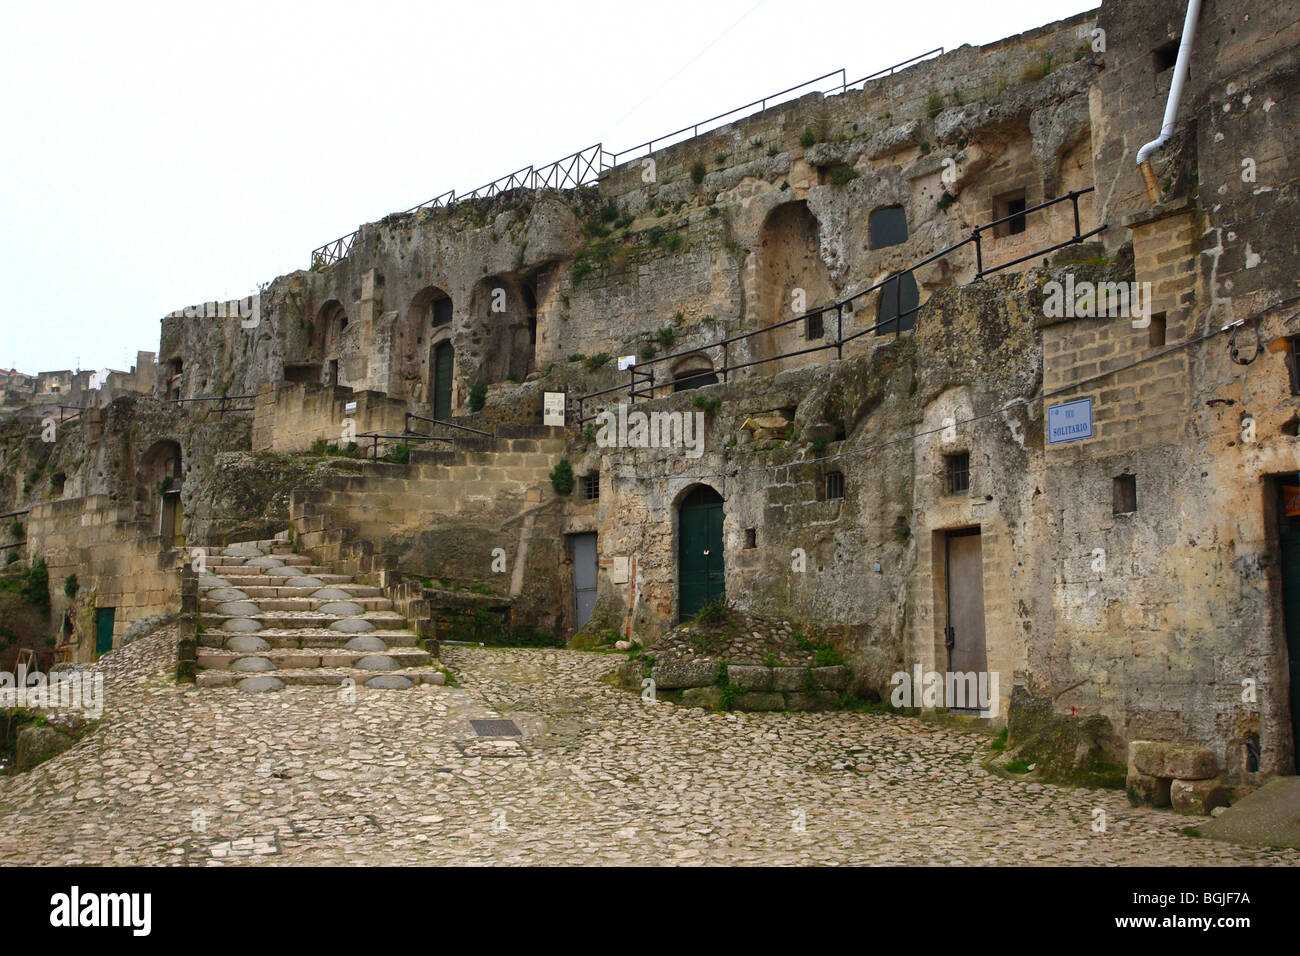 old part of matera town, unesco site in italy Stock Photo